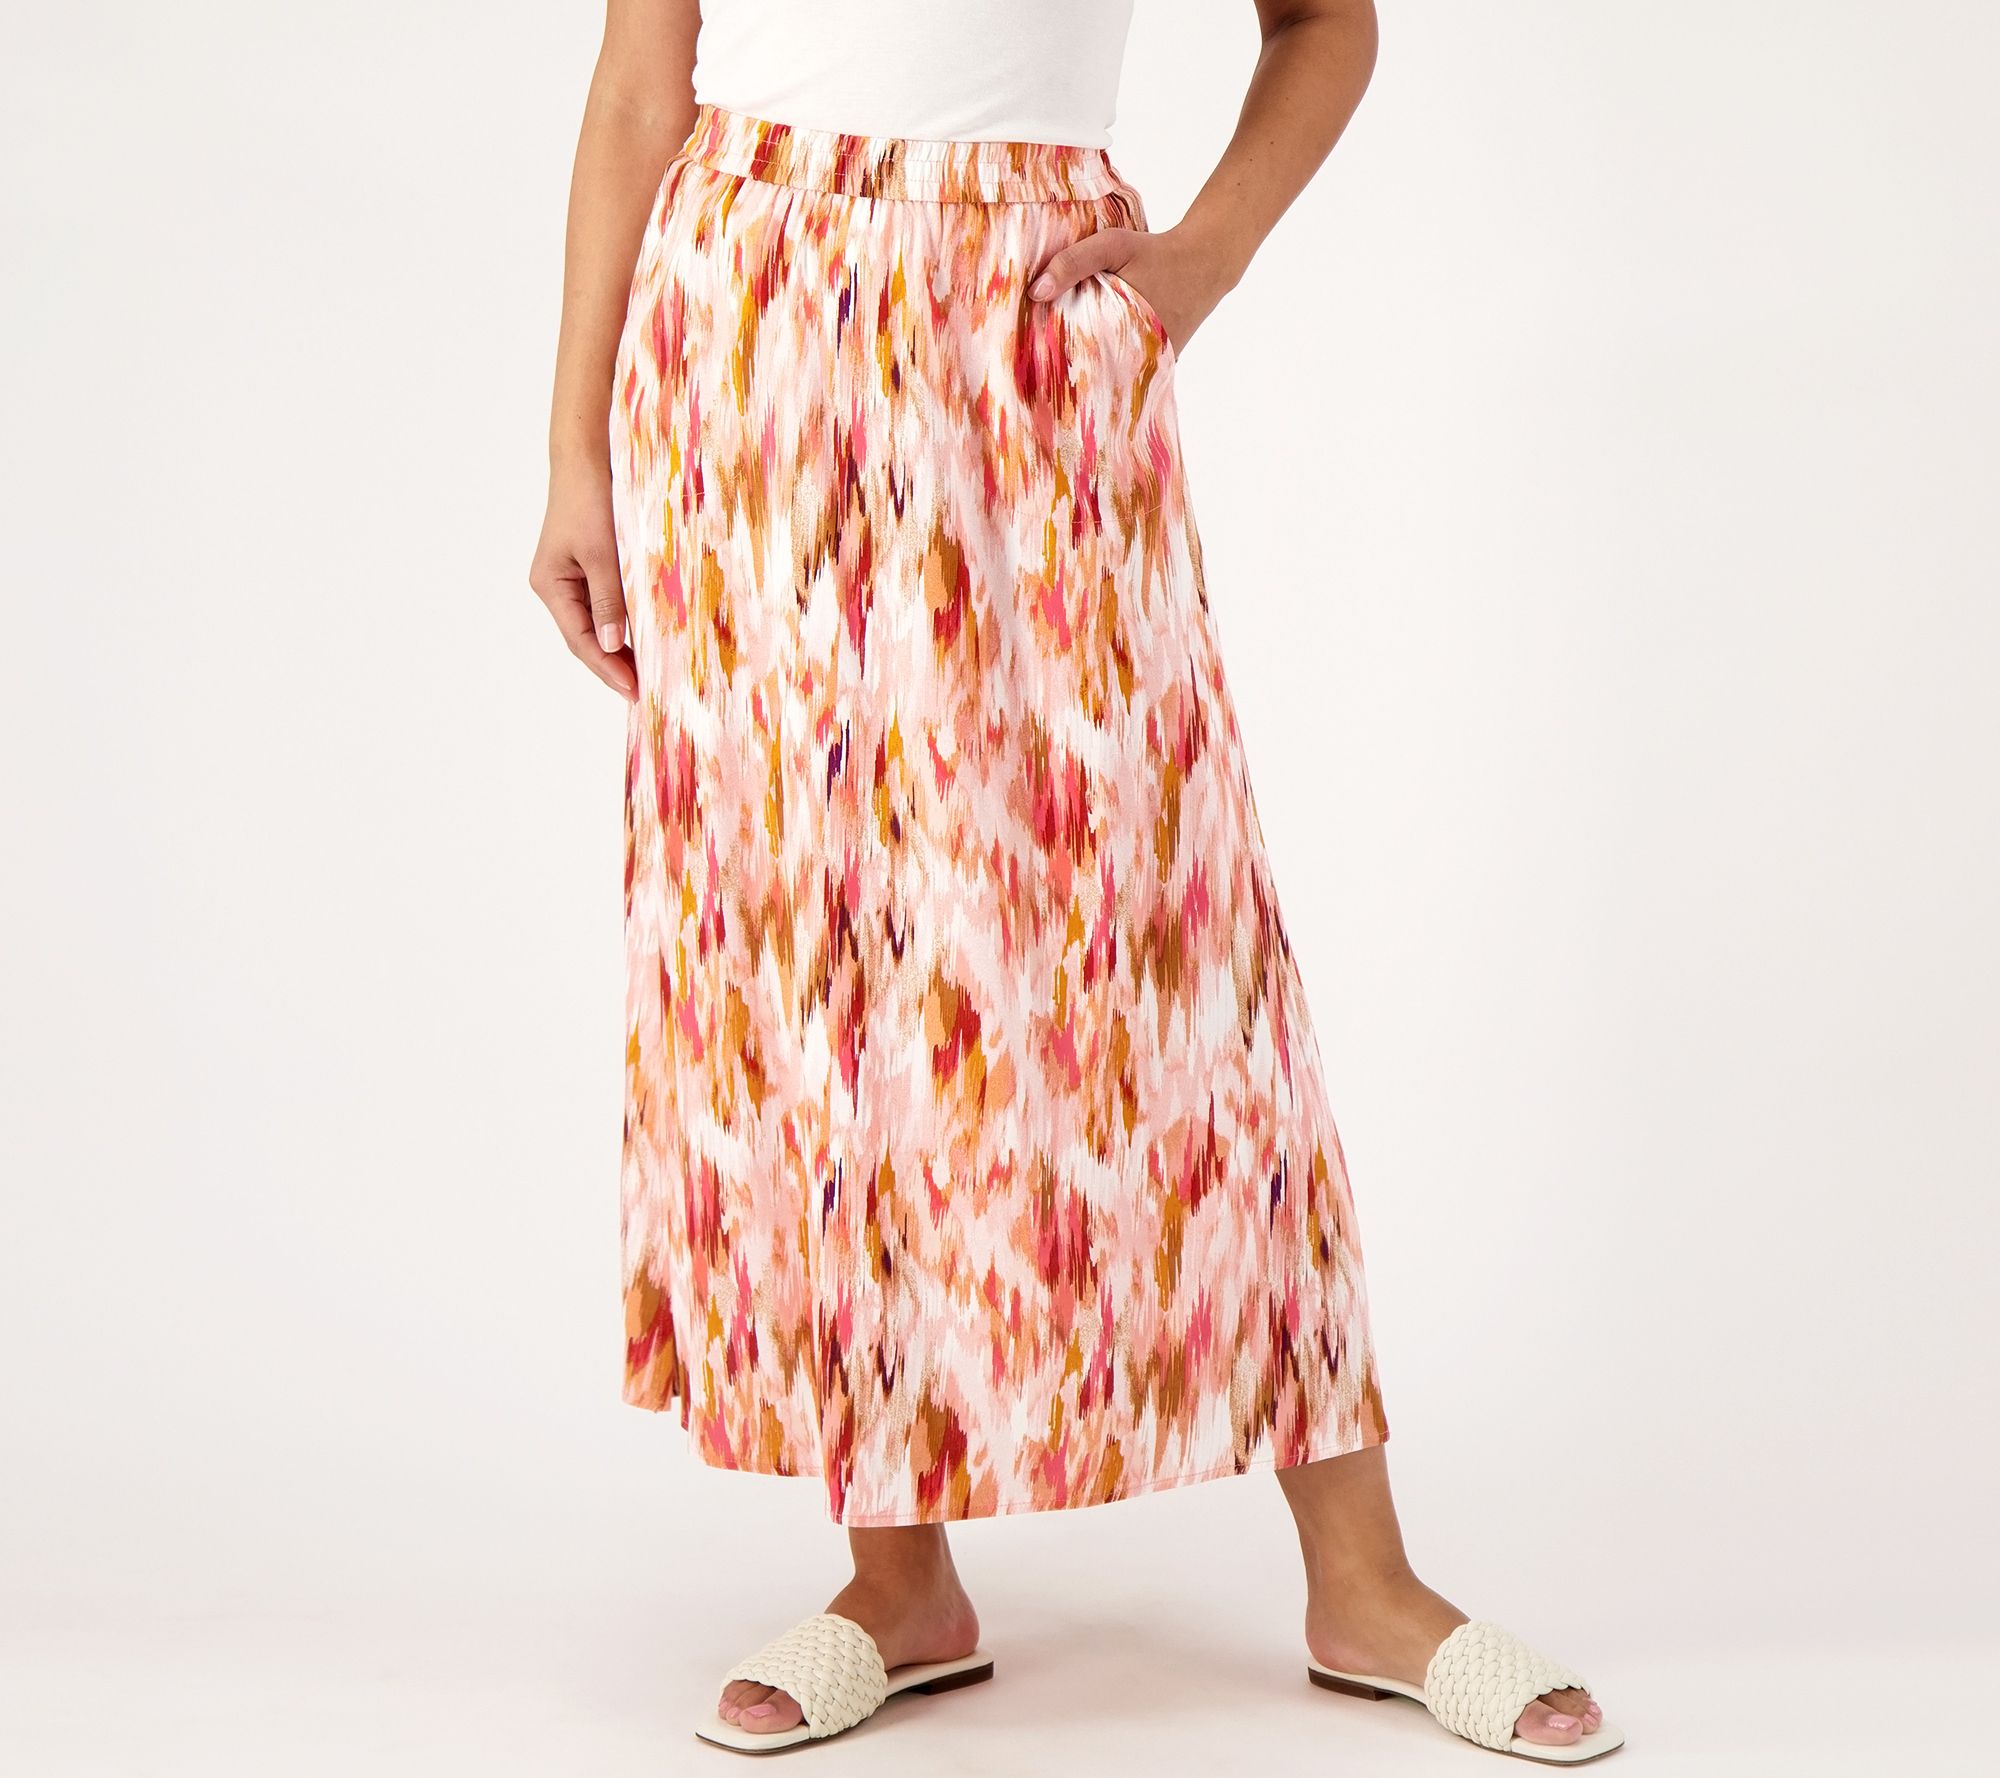 Denim & Co. Beach Petite Woven Pull-On Skirt with Side Slits - QVC.com